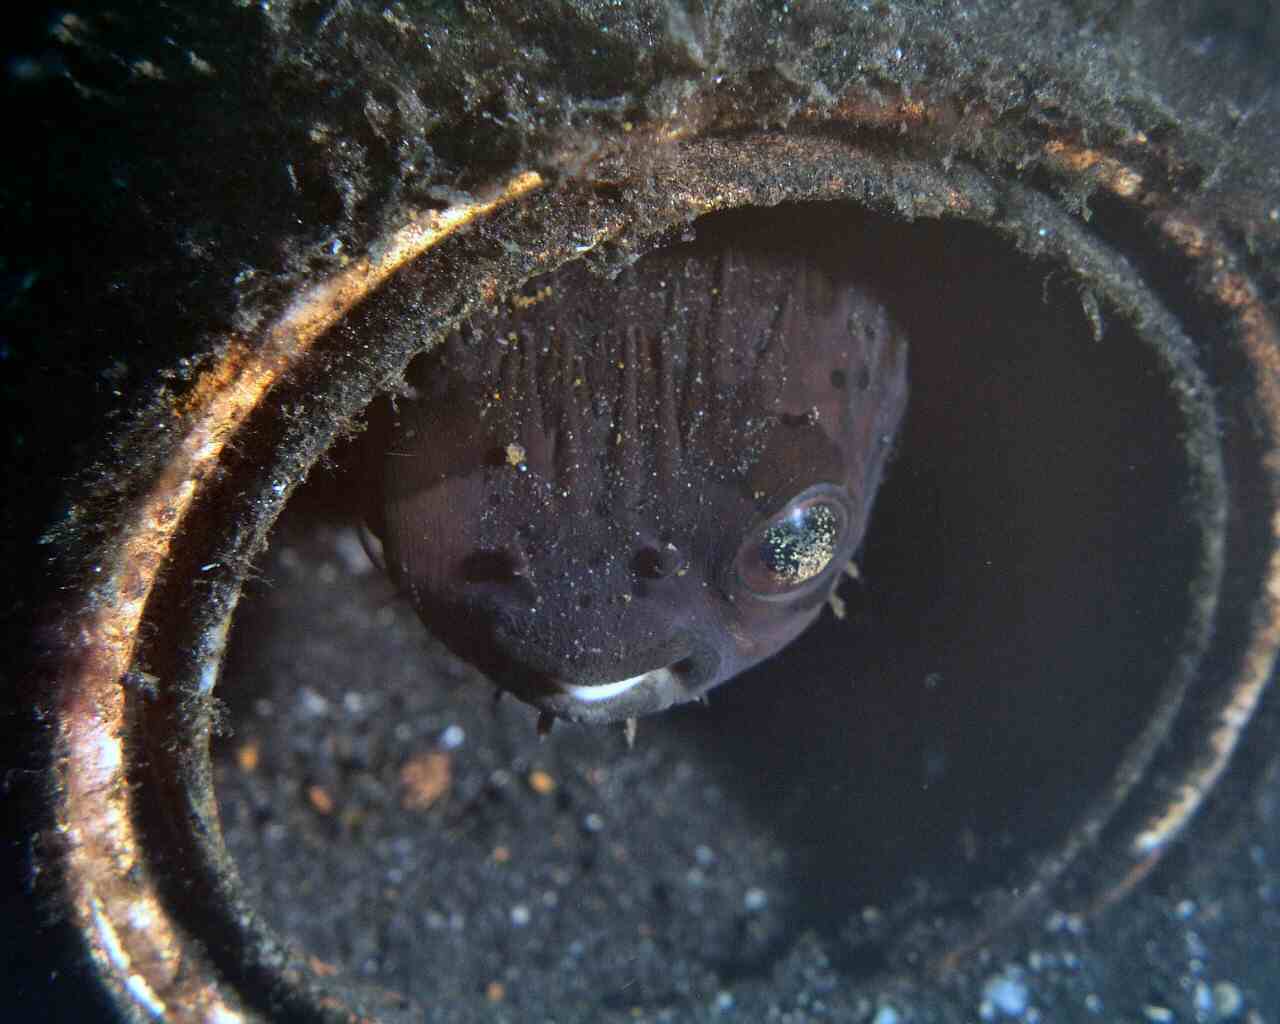 Porcupine Puffer at Lembeh